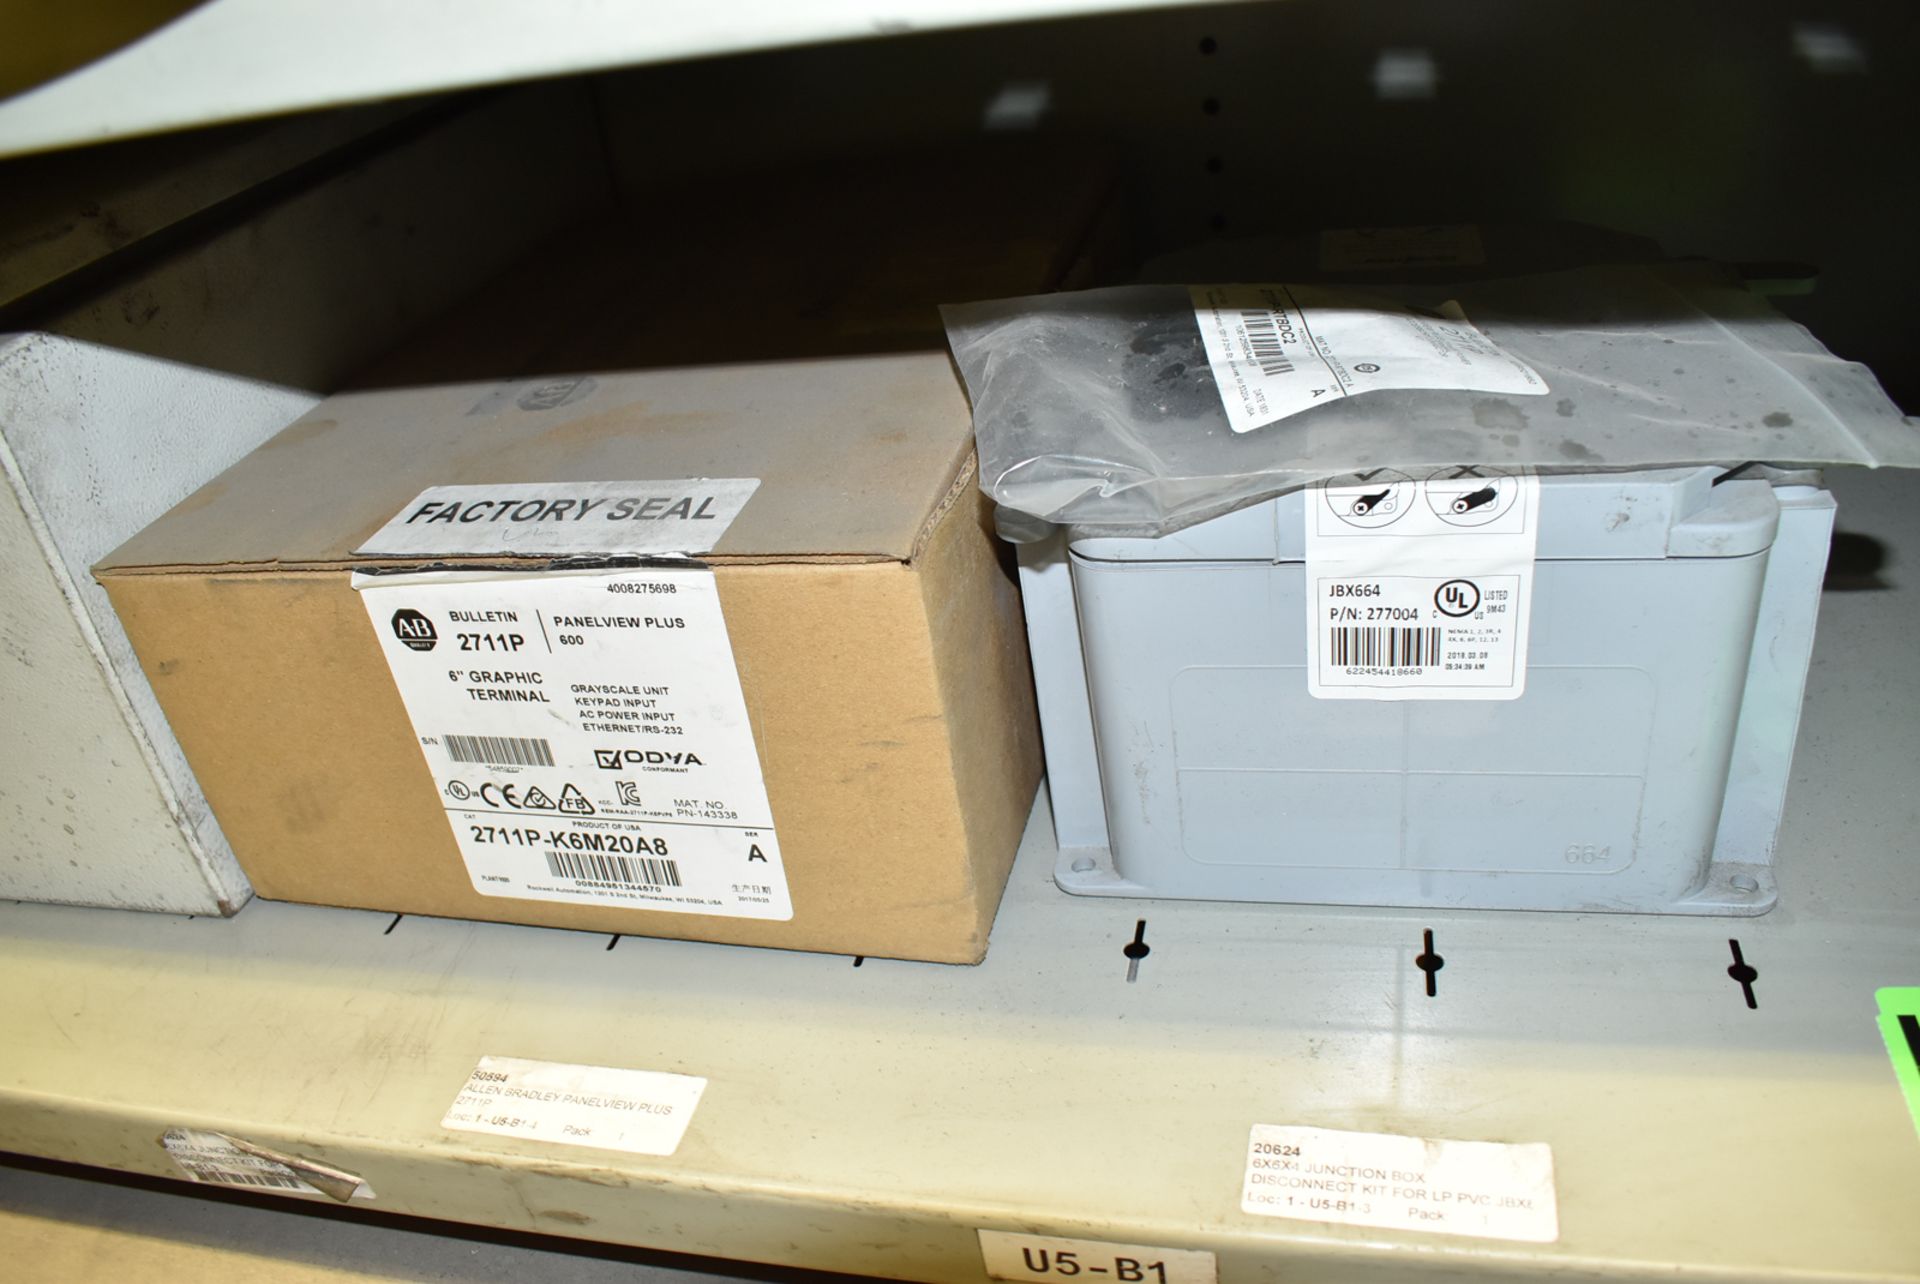 LOT/ CONTENTS OF SHELF INCLUDING ALLEN-BRADLEY PANELVIEW CONTROL, ELECTRICAL BOXES, SPARE COMPONENTS - Image 2 of 2